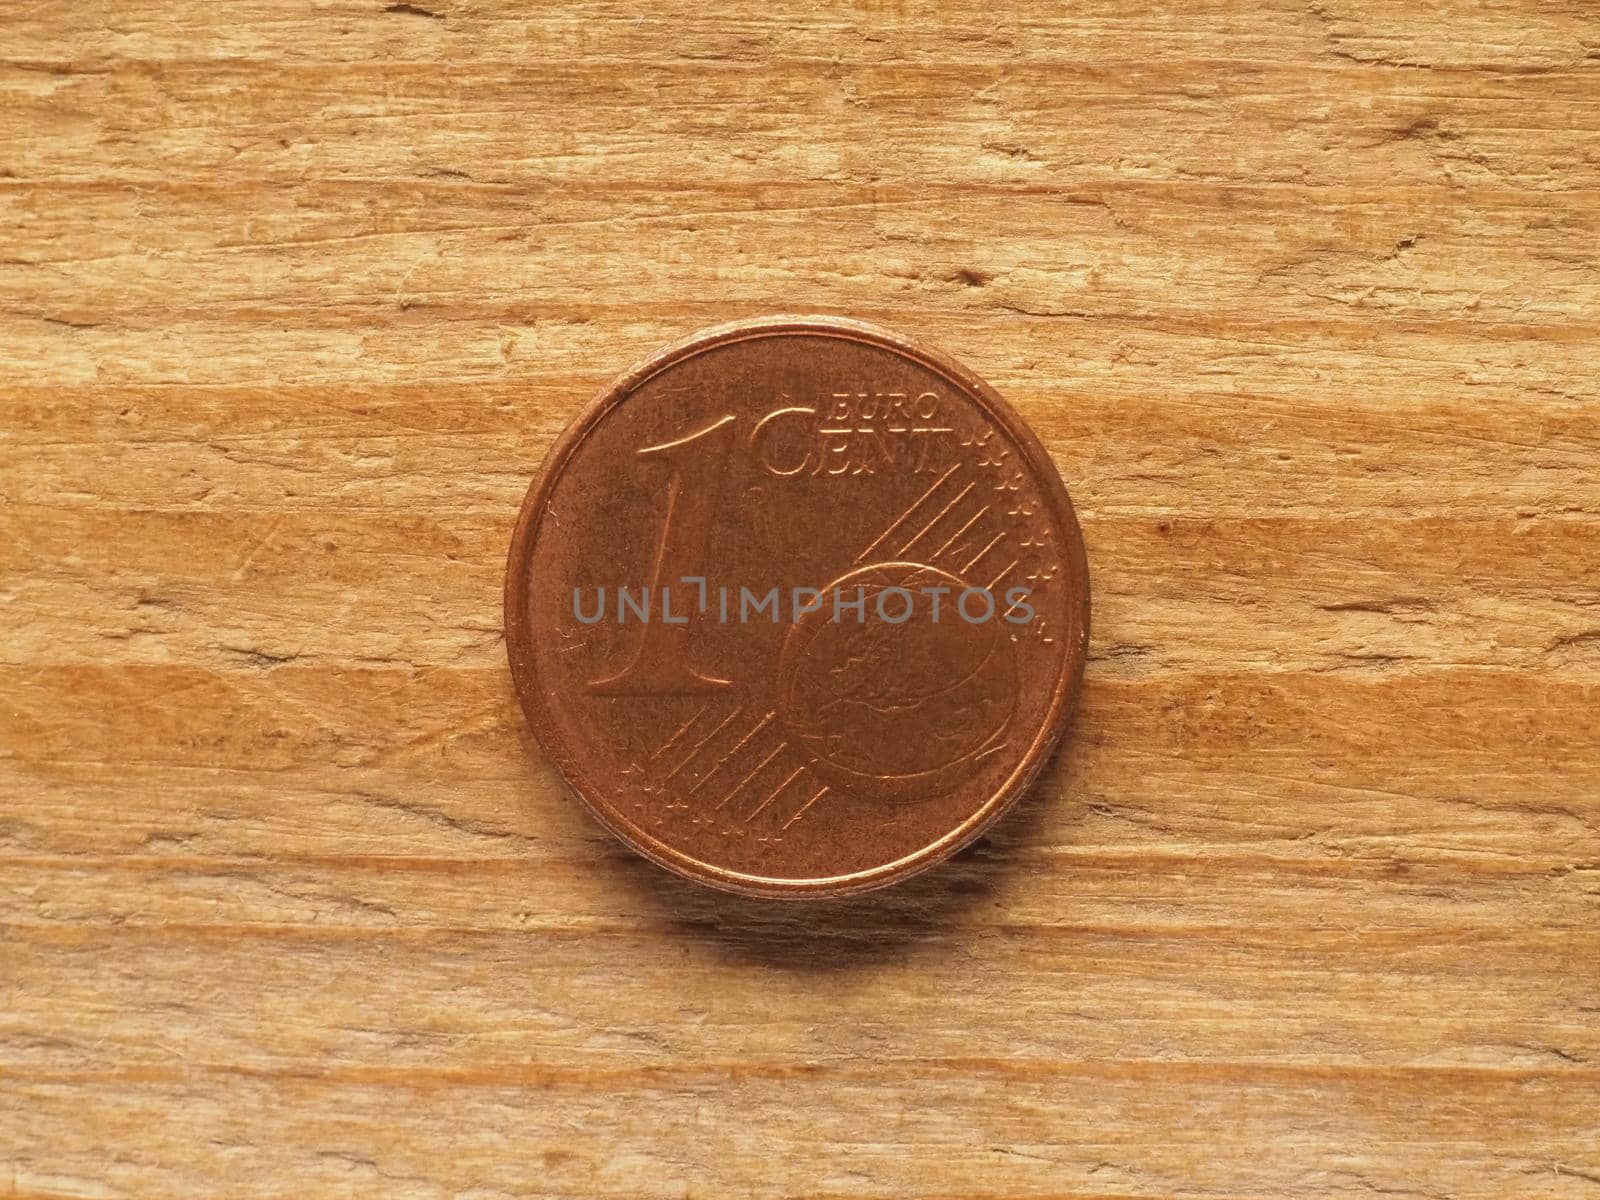 one cent coin common side, currency of the European Union